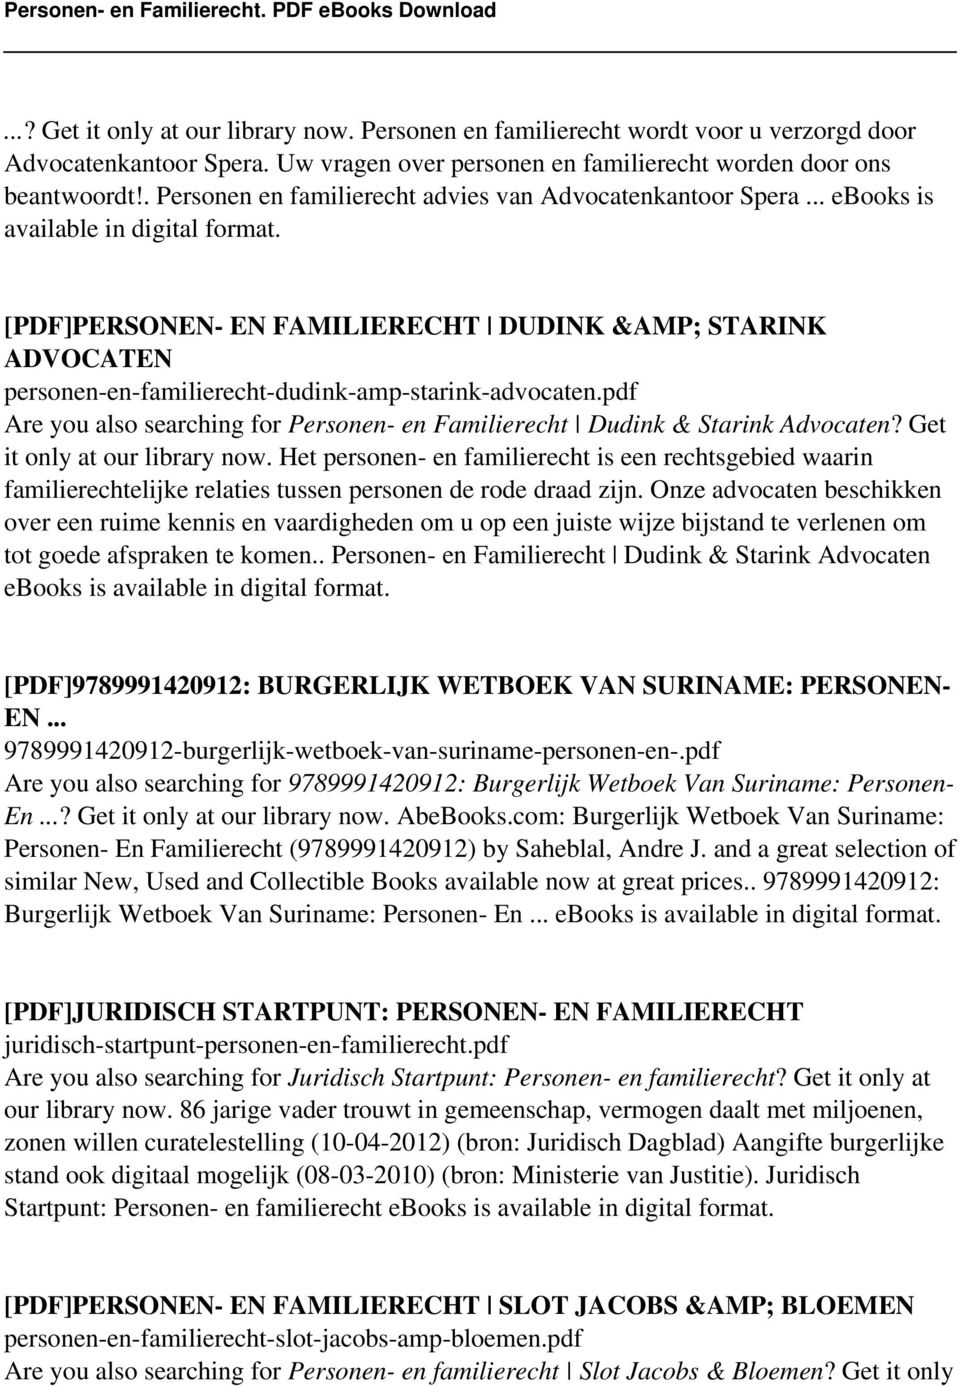 [PDF]PERSONEN- EN FAMILIERECHT DUDINK &AMP; STARINK ADVOCATEN personen-en-familierecht-dudink-amp-starink-advocaten.pdf Are you also searching for Personen- en Familierecht Dudink & Starink Advocaten?